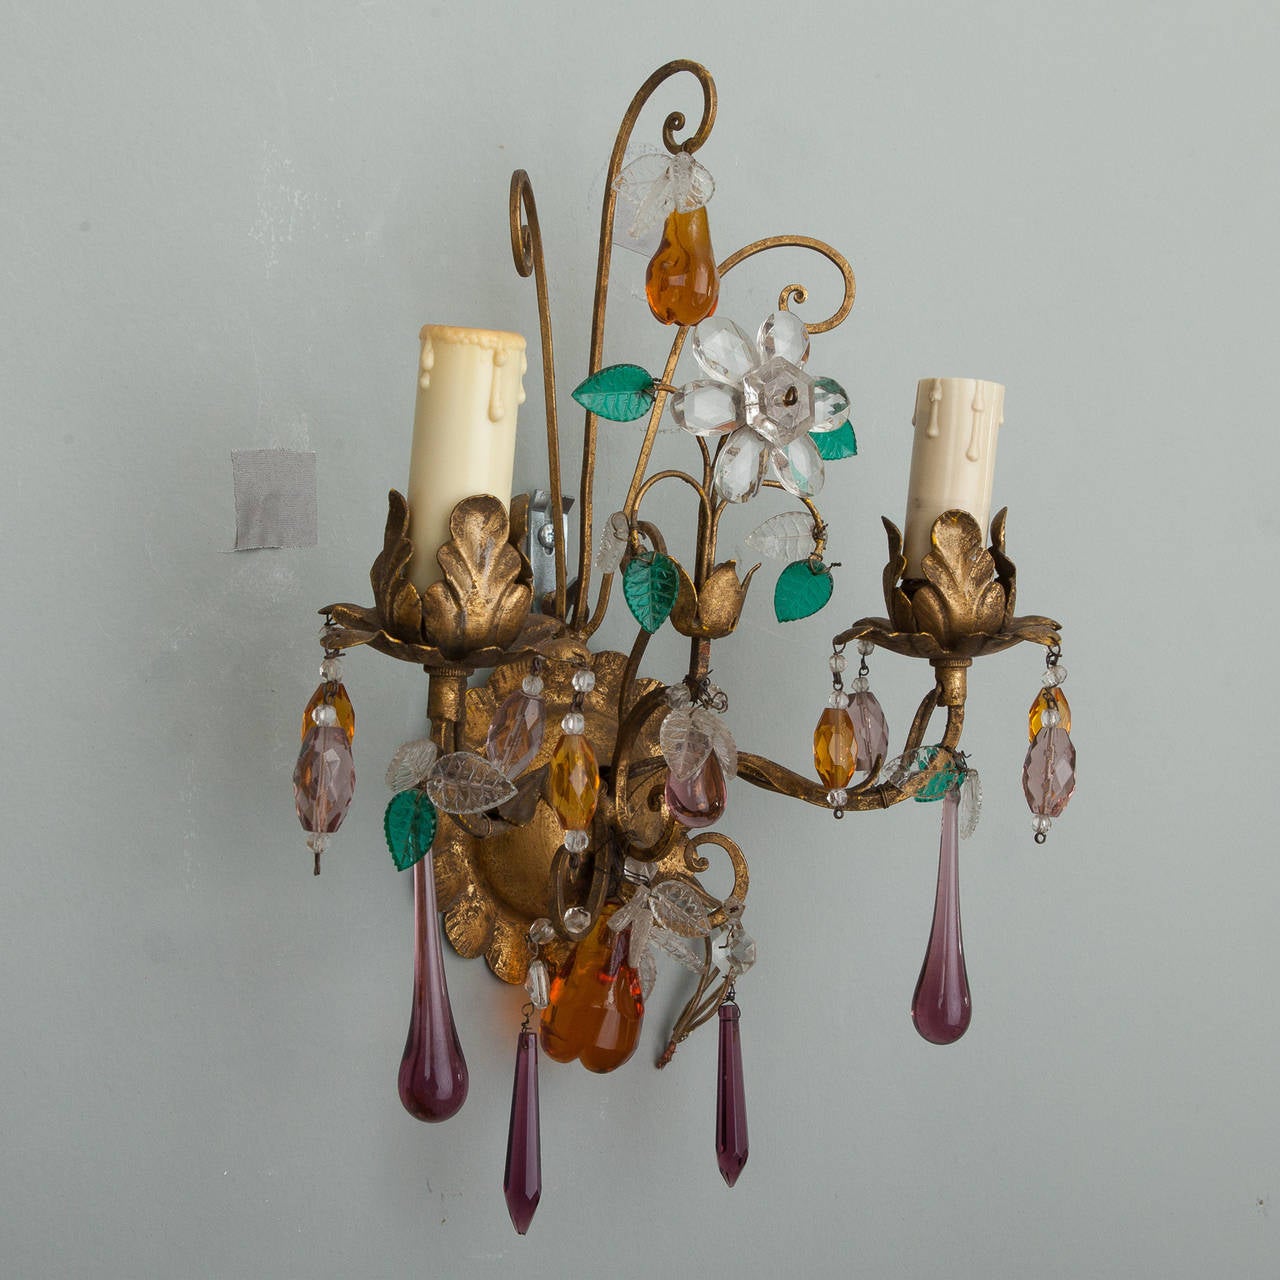 Circa 1940s pair of two light Italian tole sconces in gilt finish with candle style lights, colored crystal pendants and hand blown, glass fruit. New wiring for US electrical standards. Sold and priced as a pair.